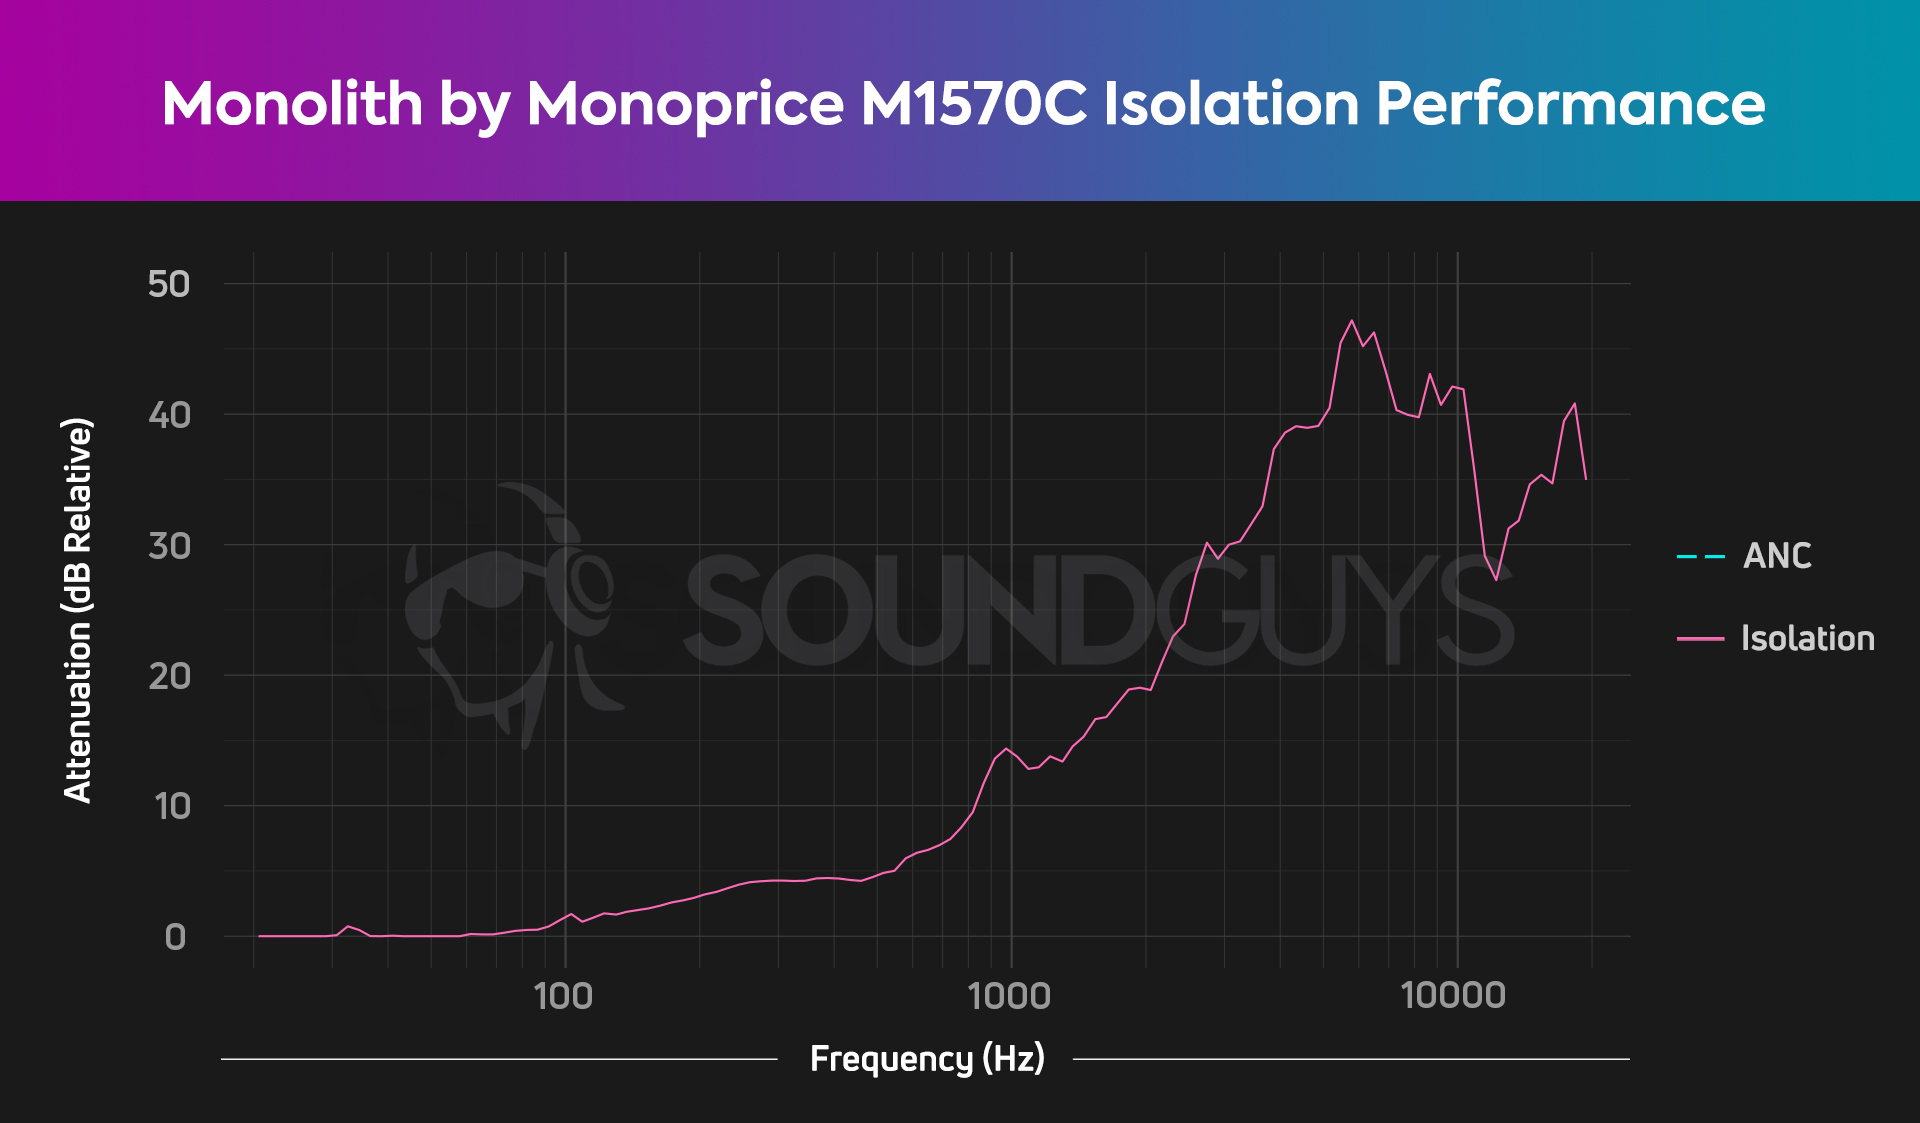 Chart of the Monolith by Monoprice M1570C isolation performance.